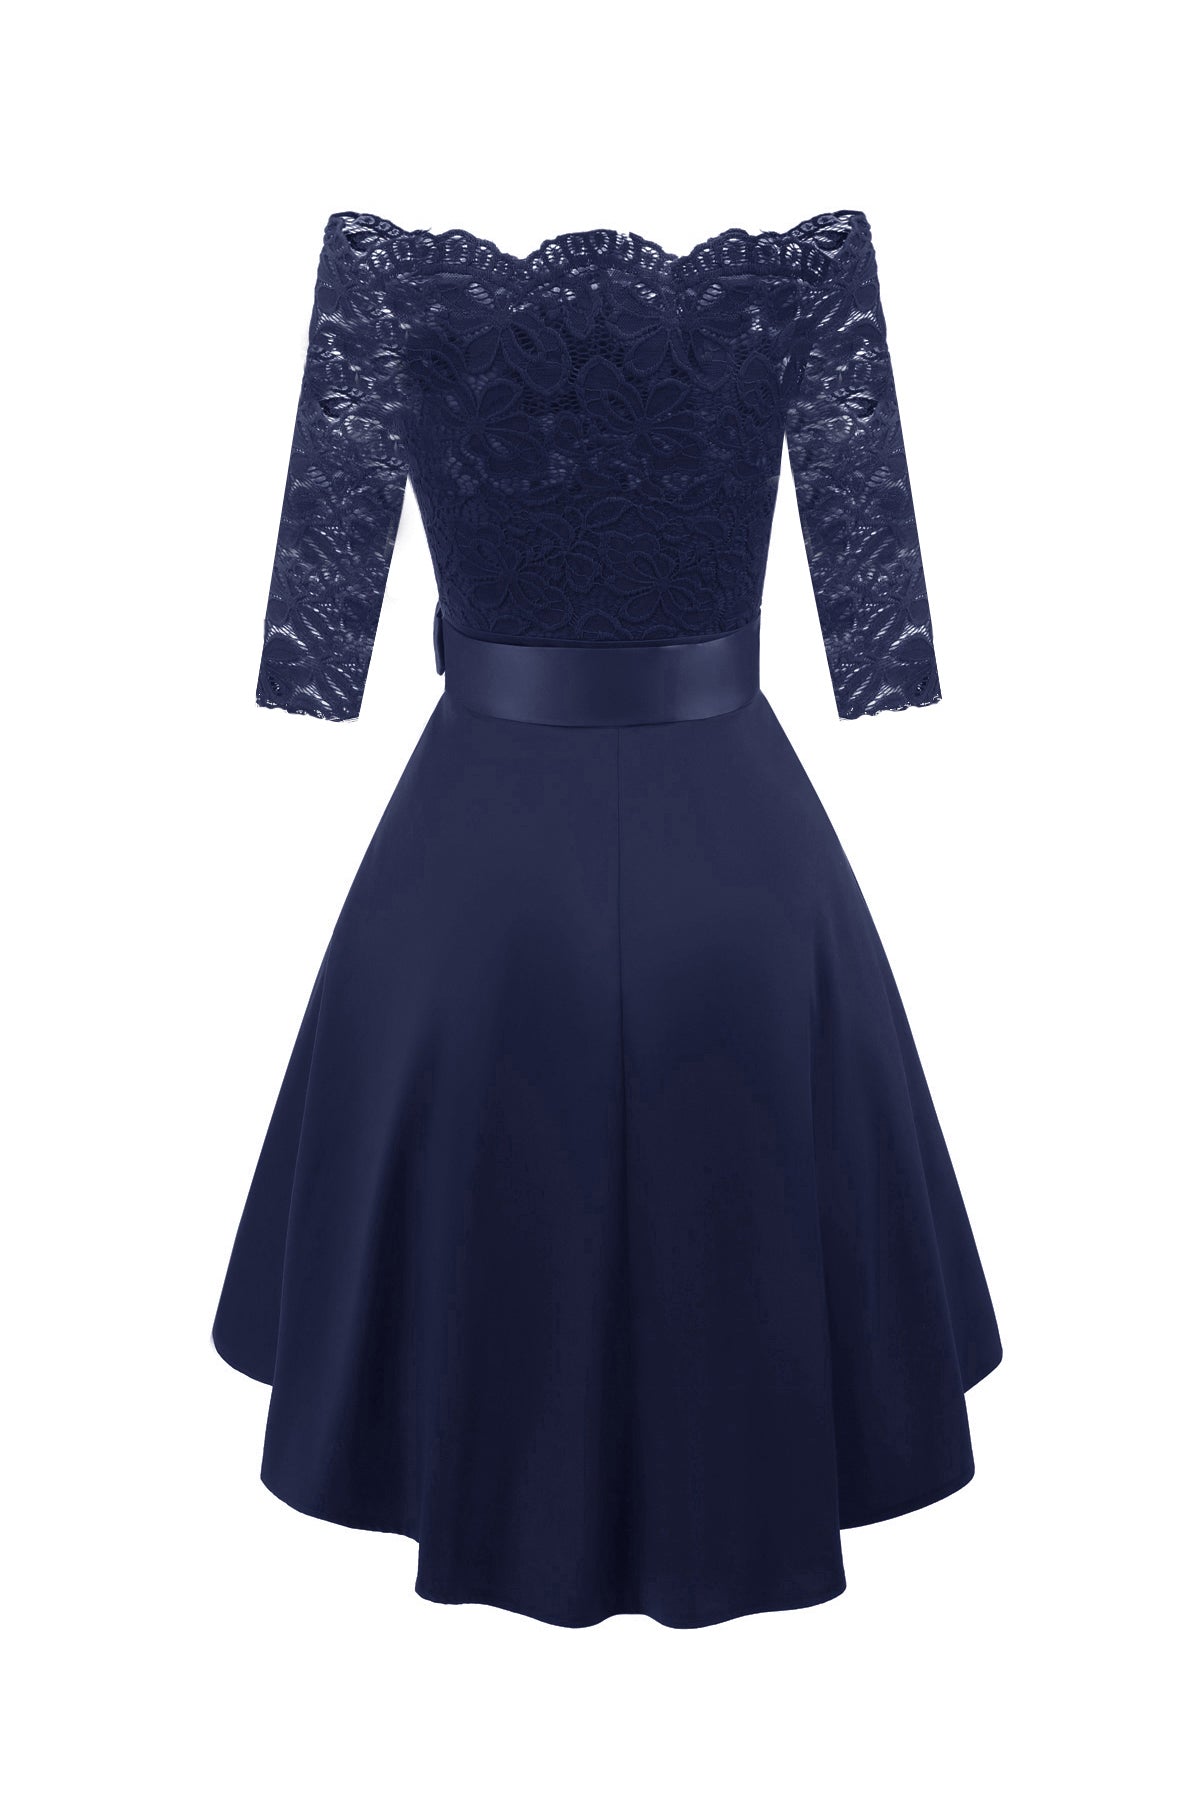 Lace High Low 3/4 Sleeve Homecoming Dresses